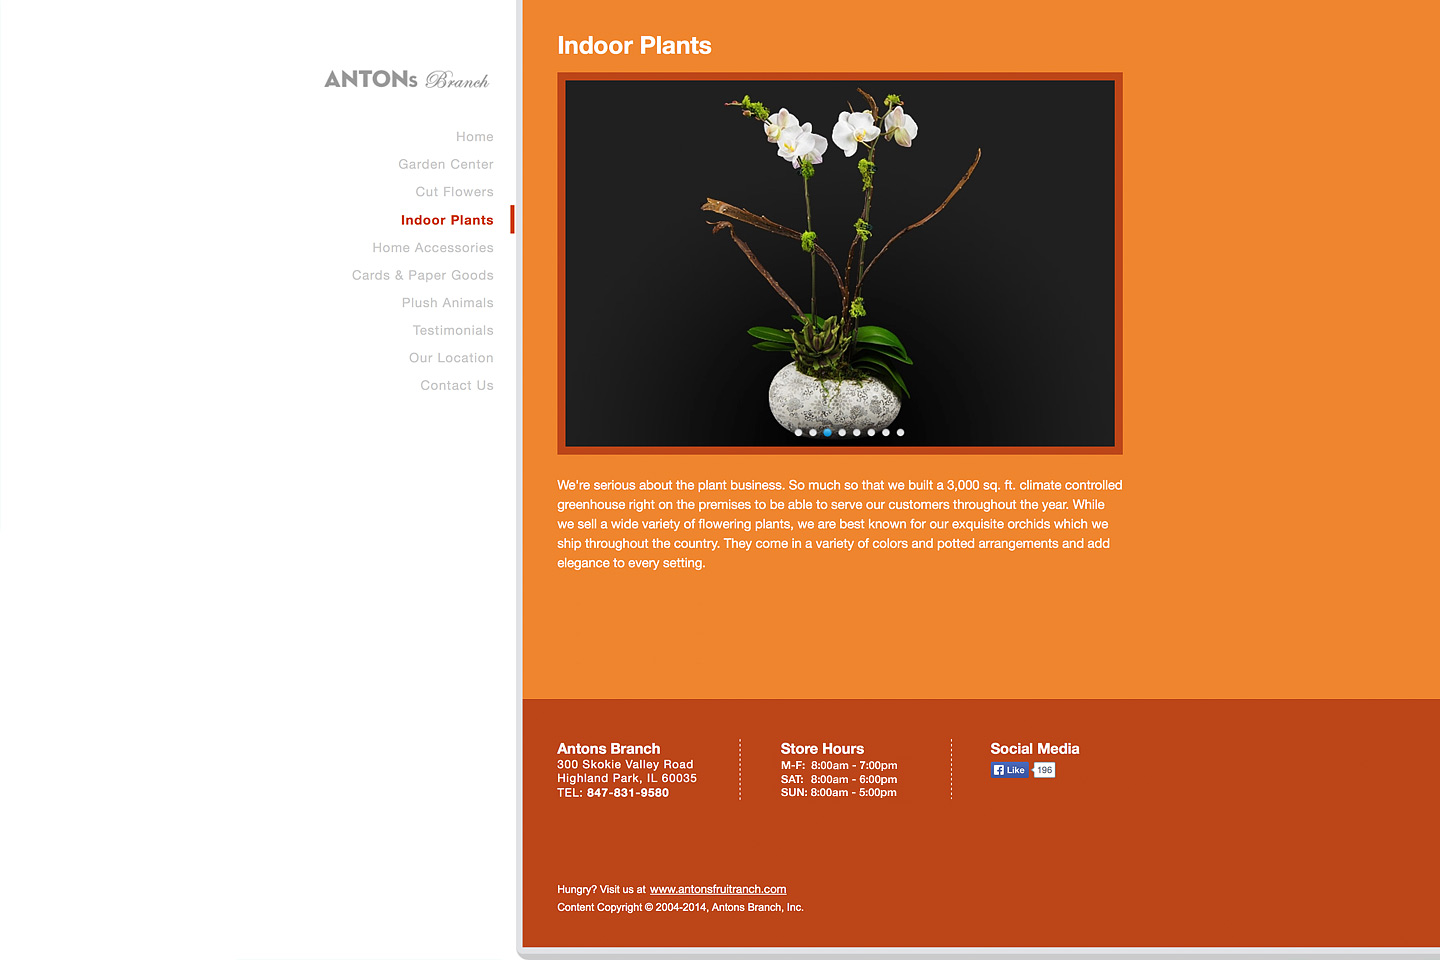 a screen capture of the indoor plants page, featuring a beautiful potted phalaenopsis orchid plant for sale at the antons branch